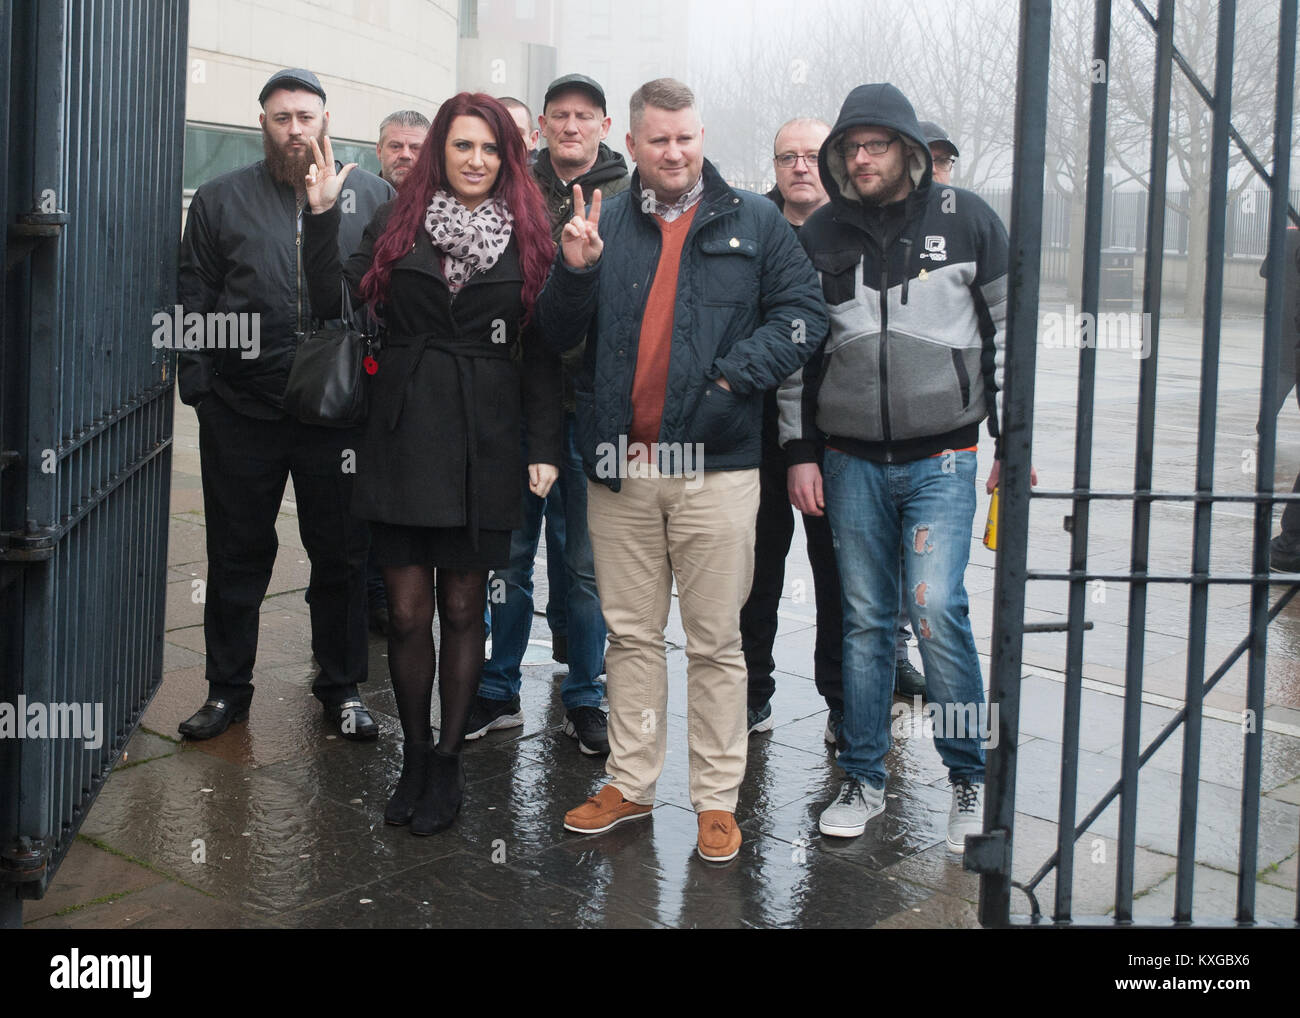 Belfast, Northern Ireland. 10th Jan, 2018. Belfast, Northern Ireland, U.K. 10th Jan 2018. Britain First's leader Paul Golding with Jayda Fransen and supporters making his first court appearance after being charged with using 'threatening, abusive, insulting words or behaviour' . Credit: John Rymer/Alamy Live News Stock Photo